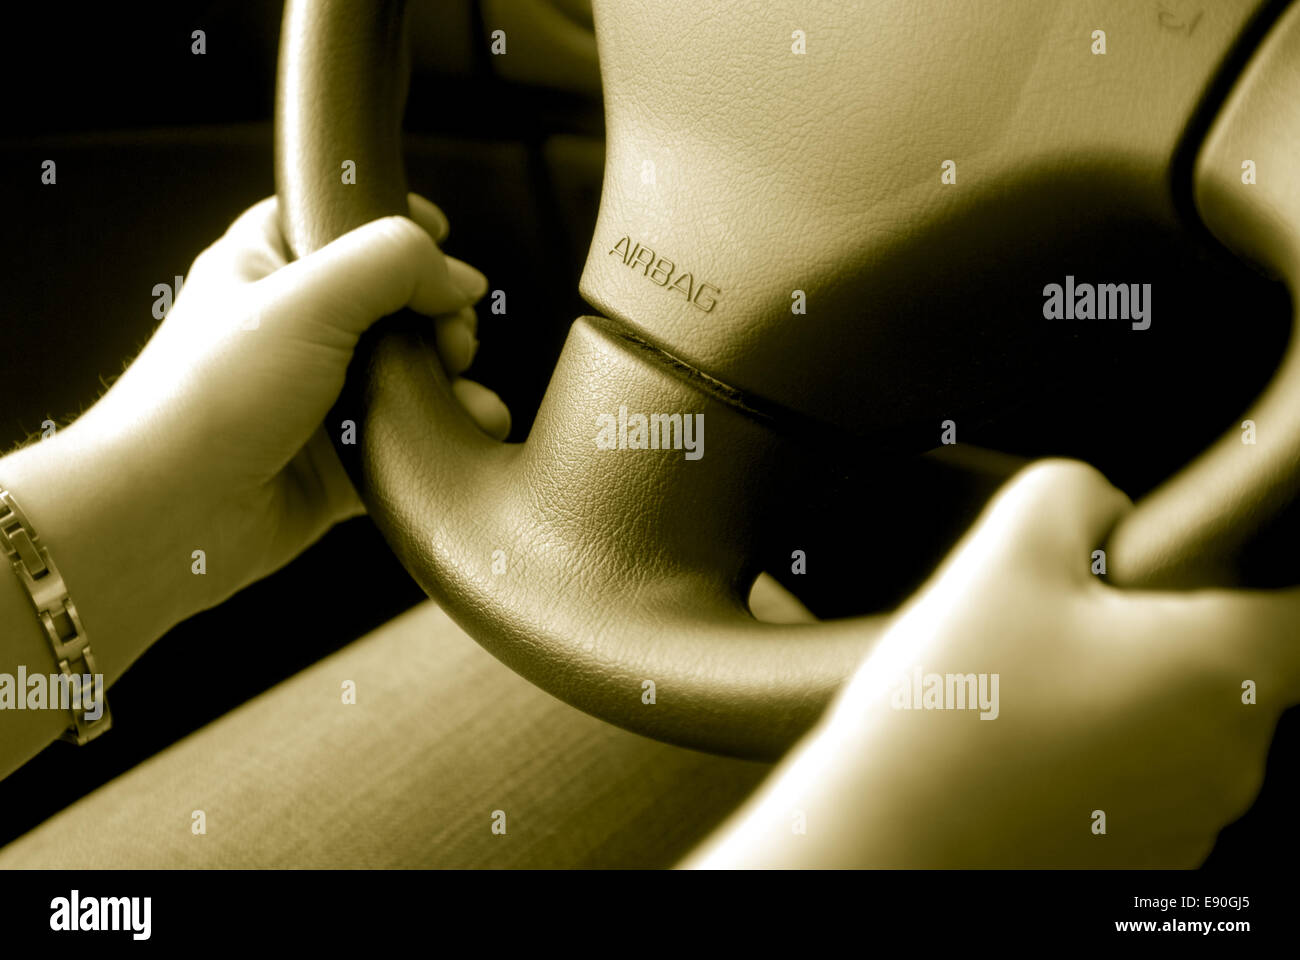 Steering wheel with airbag Stock Photo